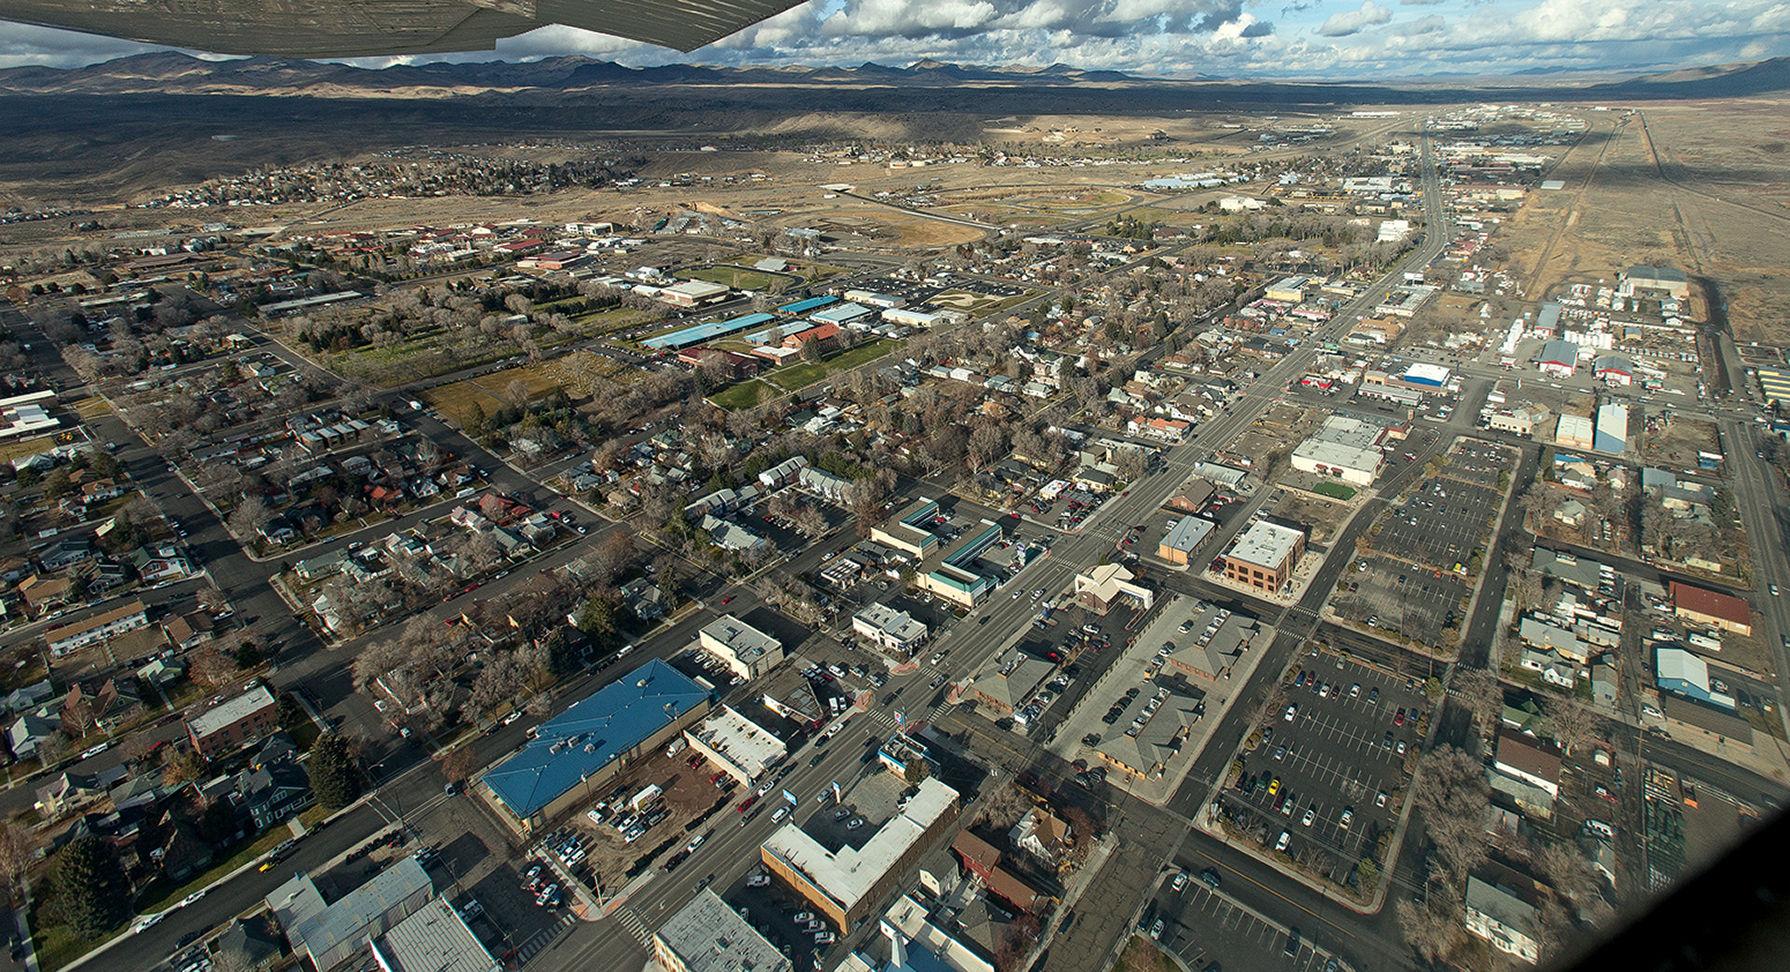 Demographer predicts overall growth in Elko next 20 years